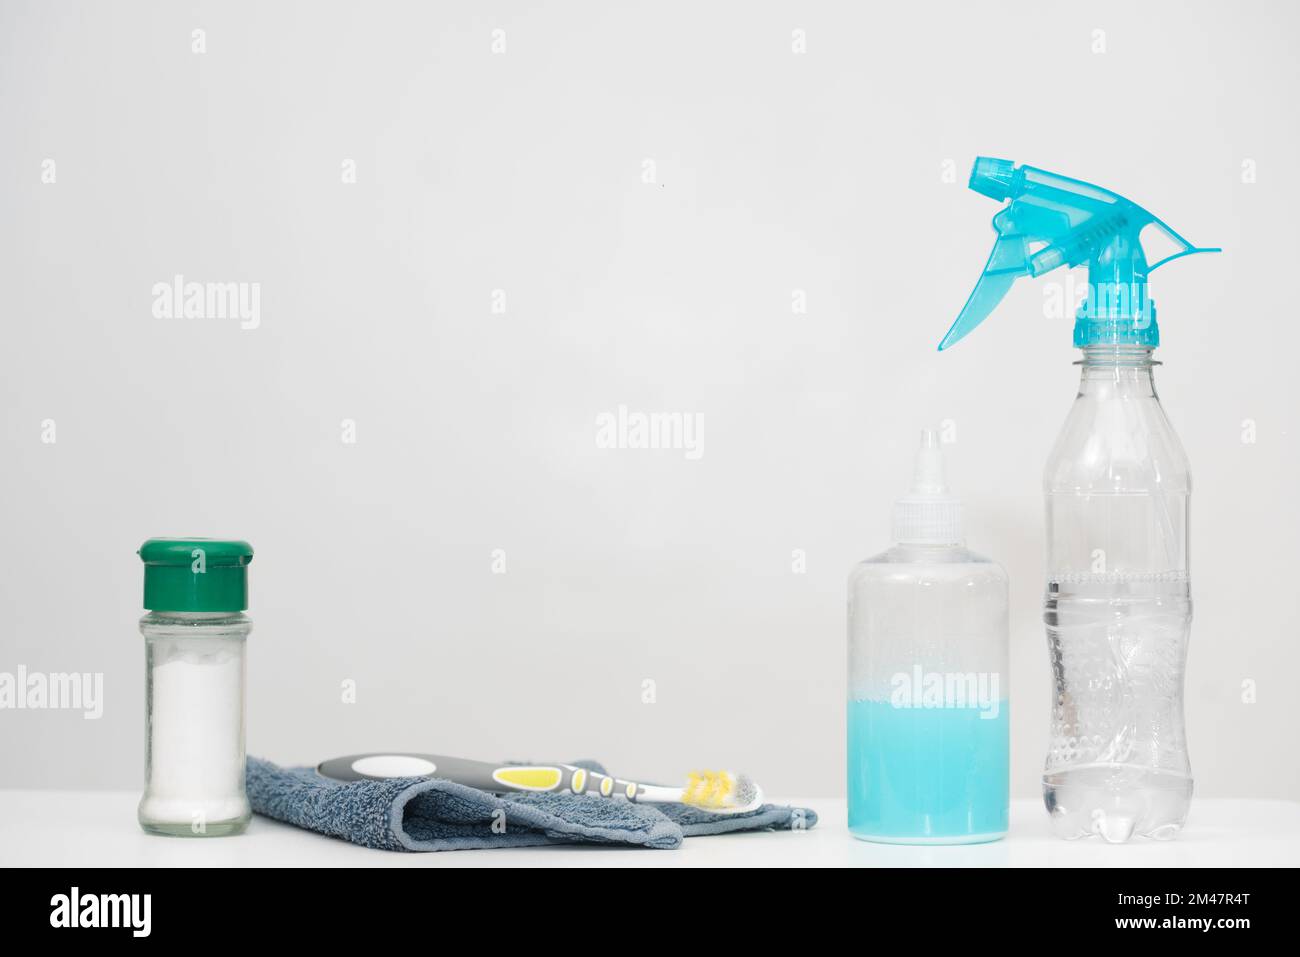 Home cleaning products in reused plastic bottles. Recycled household materials on white background. Horizontal copy space. Save the earth concept. Stock Photo